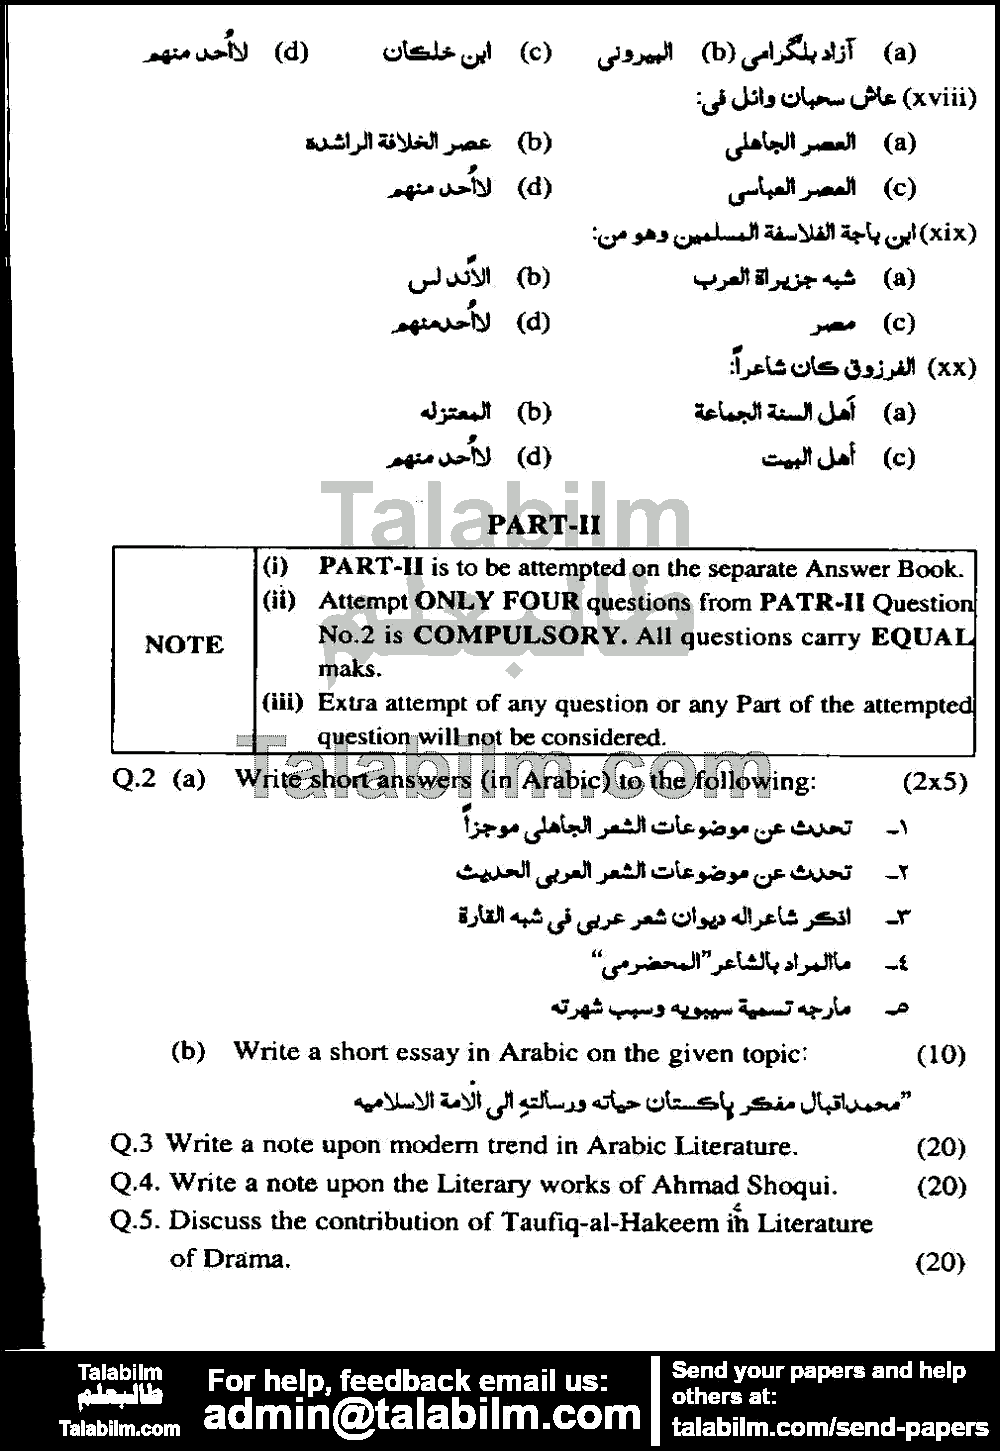 Arabic 0 past paper for 2009 Page No. 5